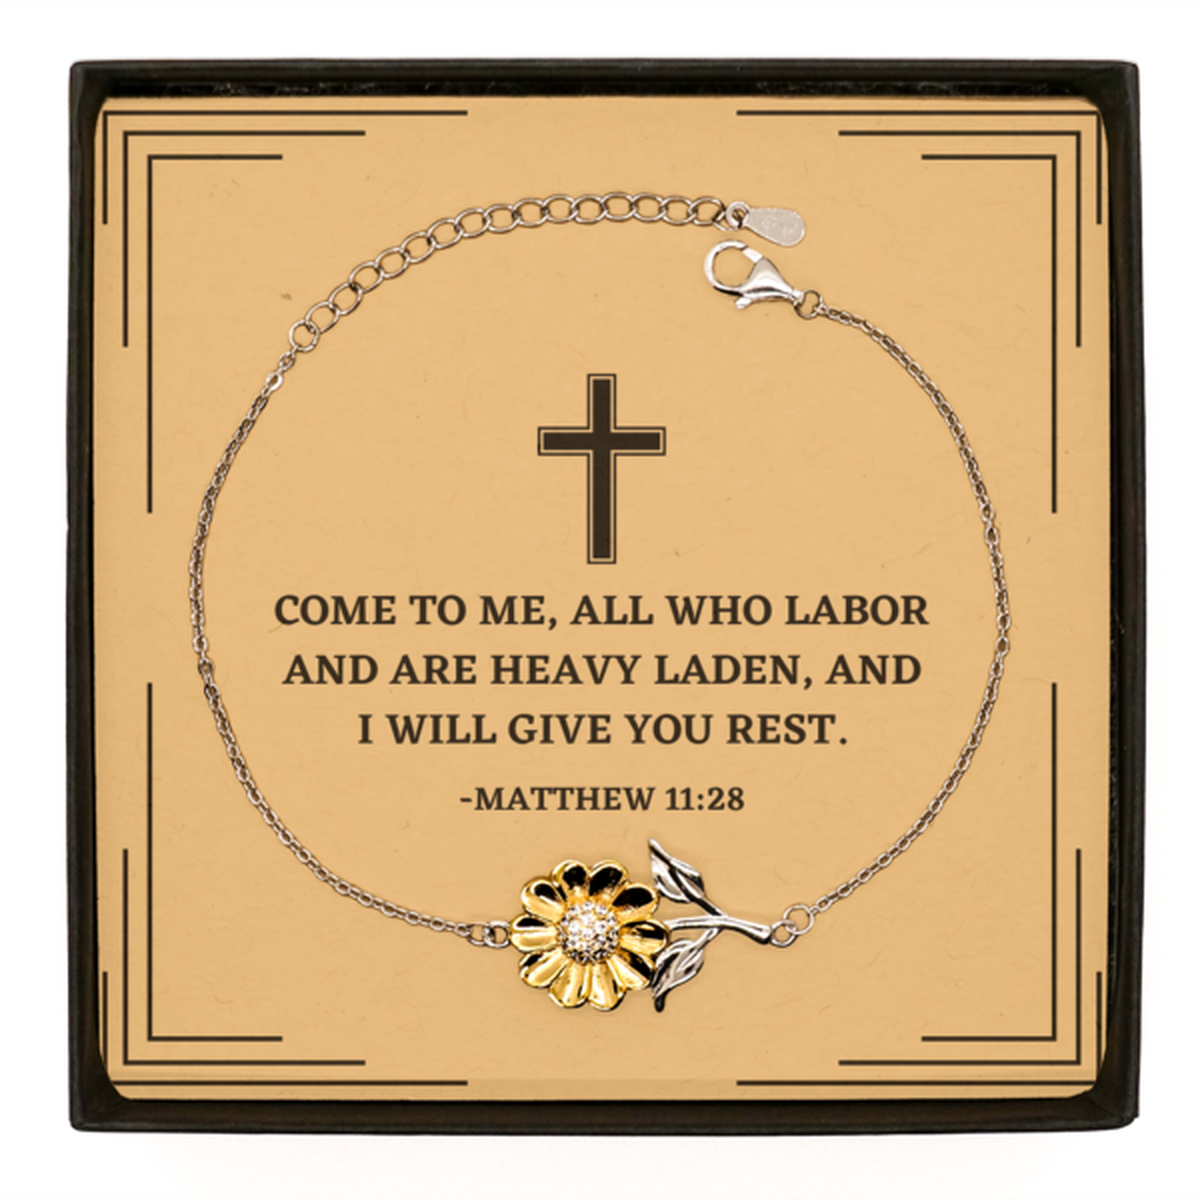 Baptism Gifts For Teenage Boys Girls, Christian Bible Verse Sterling Silver Sunflower Bracelet, Come to me, all who labor, Confirmation Gifts, Bible Verse Card for Son, Godson, Grandson